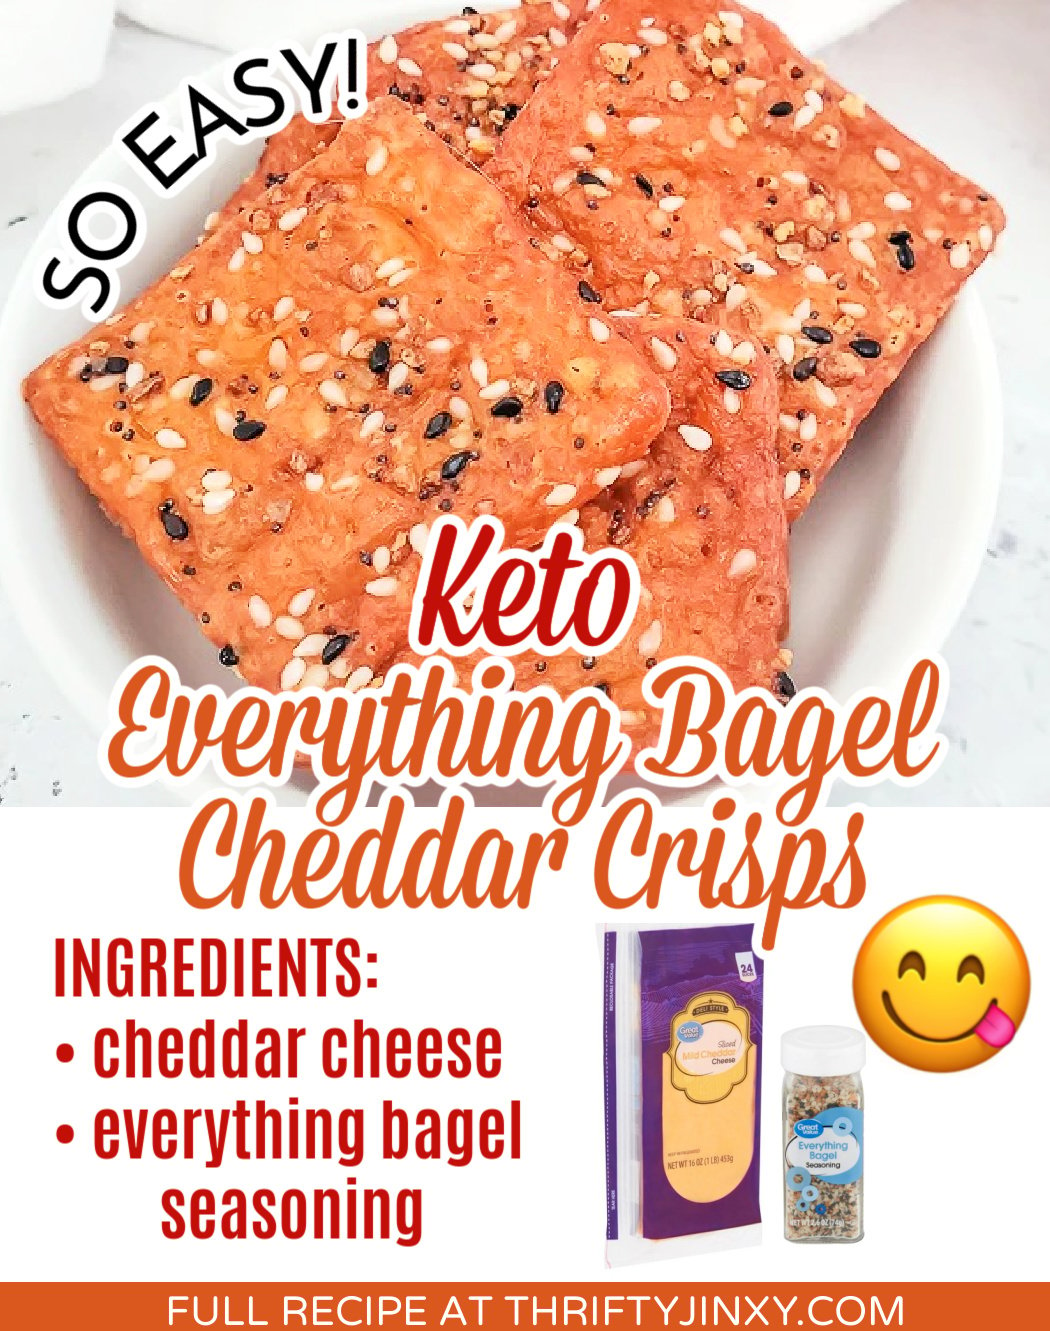 Keto Everything Bagel Cheddar Crisps with Ingredient Photos